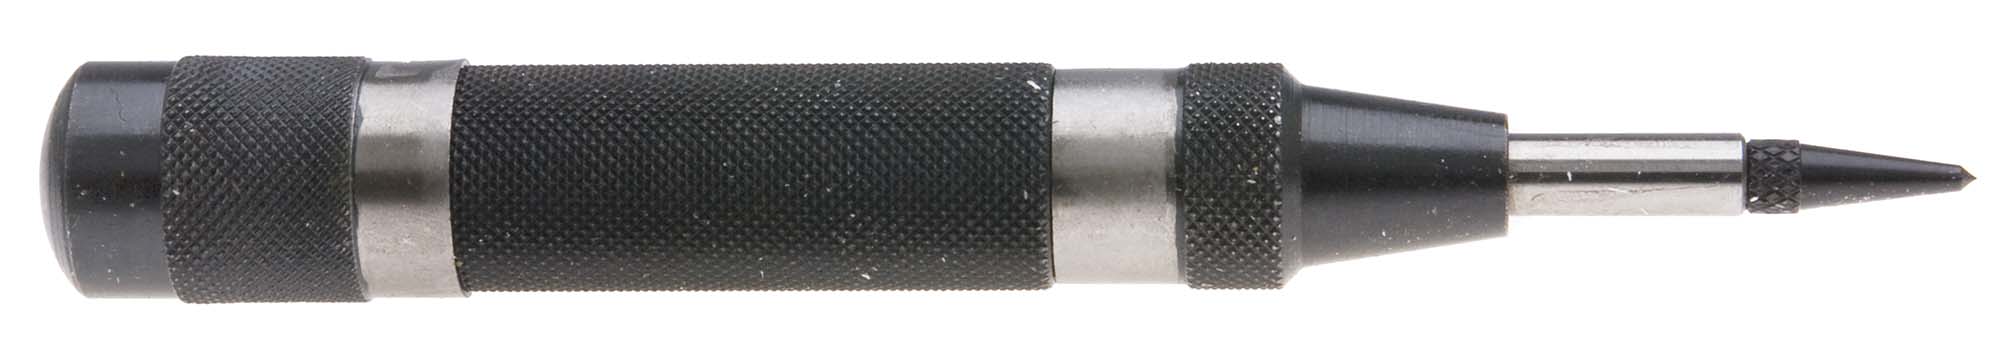 General  78 Heavy Duty Automatic Center Punch